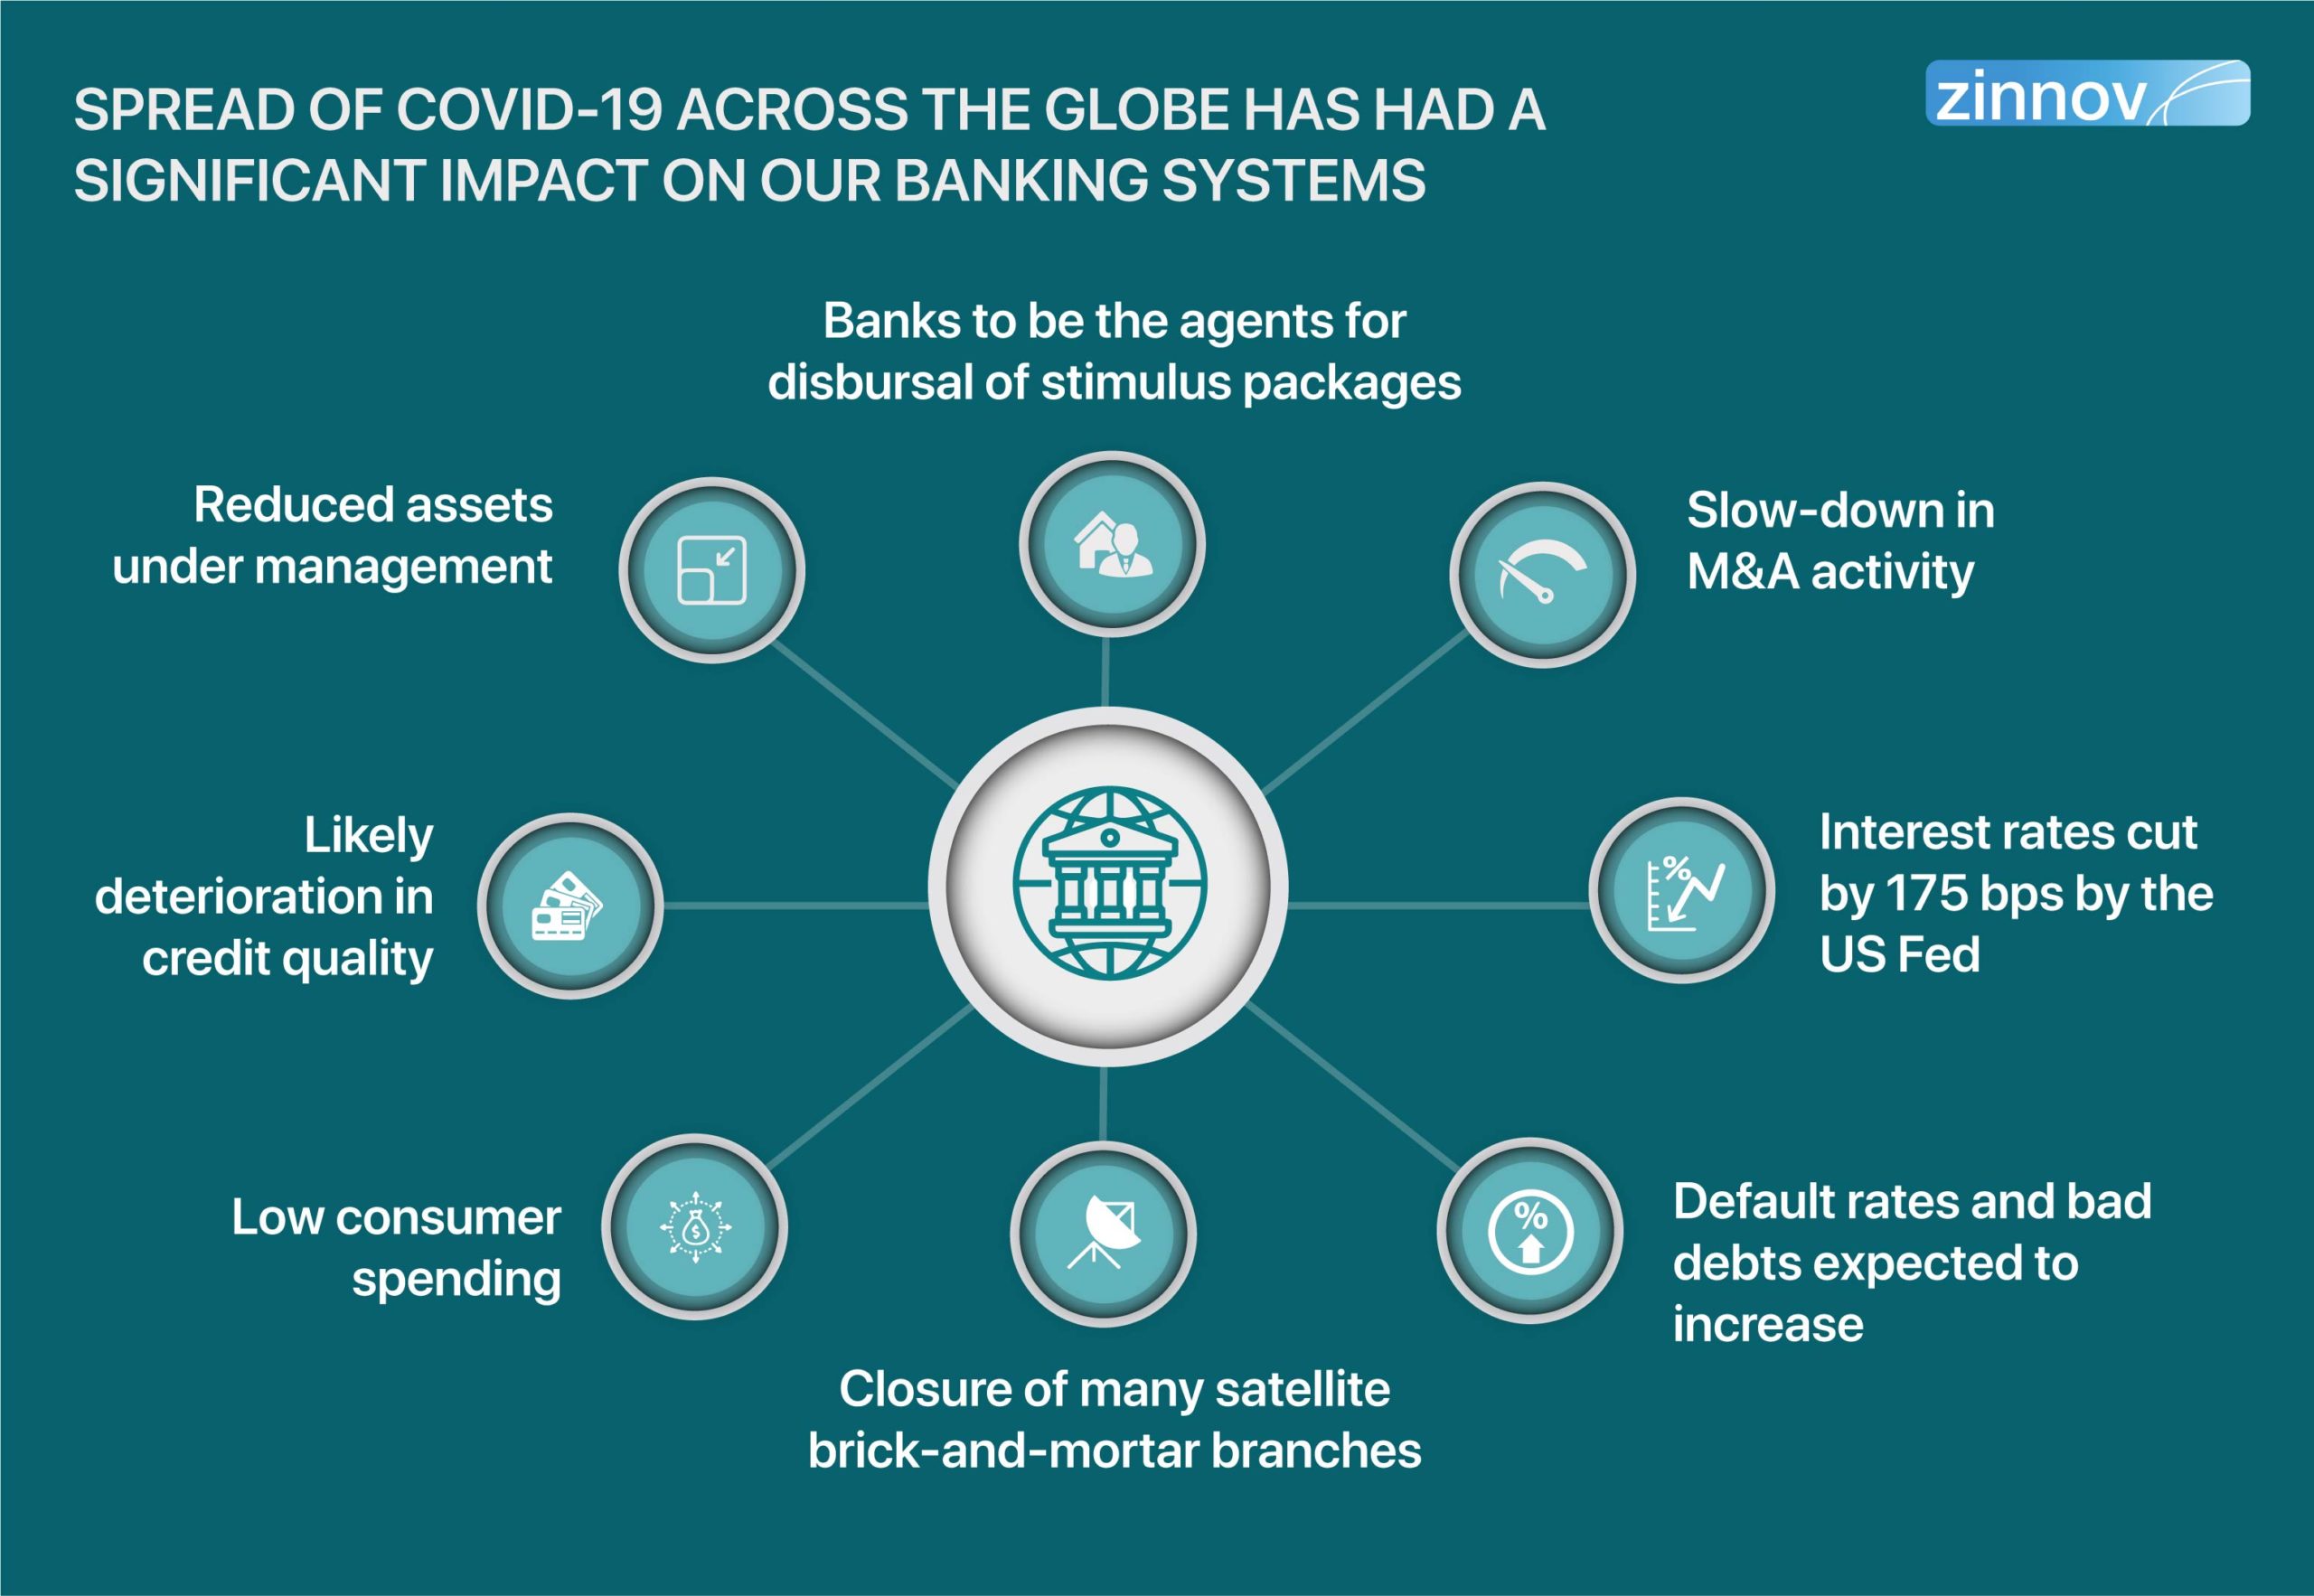 spread of COVID-19 has had a significant impact on the global banking systems